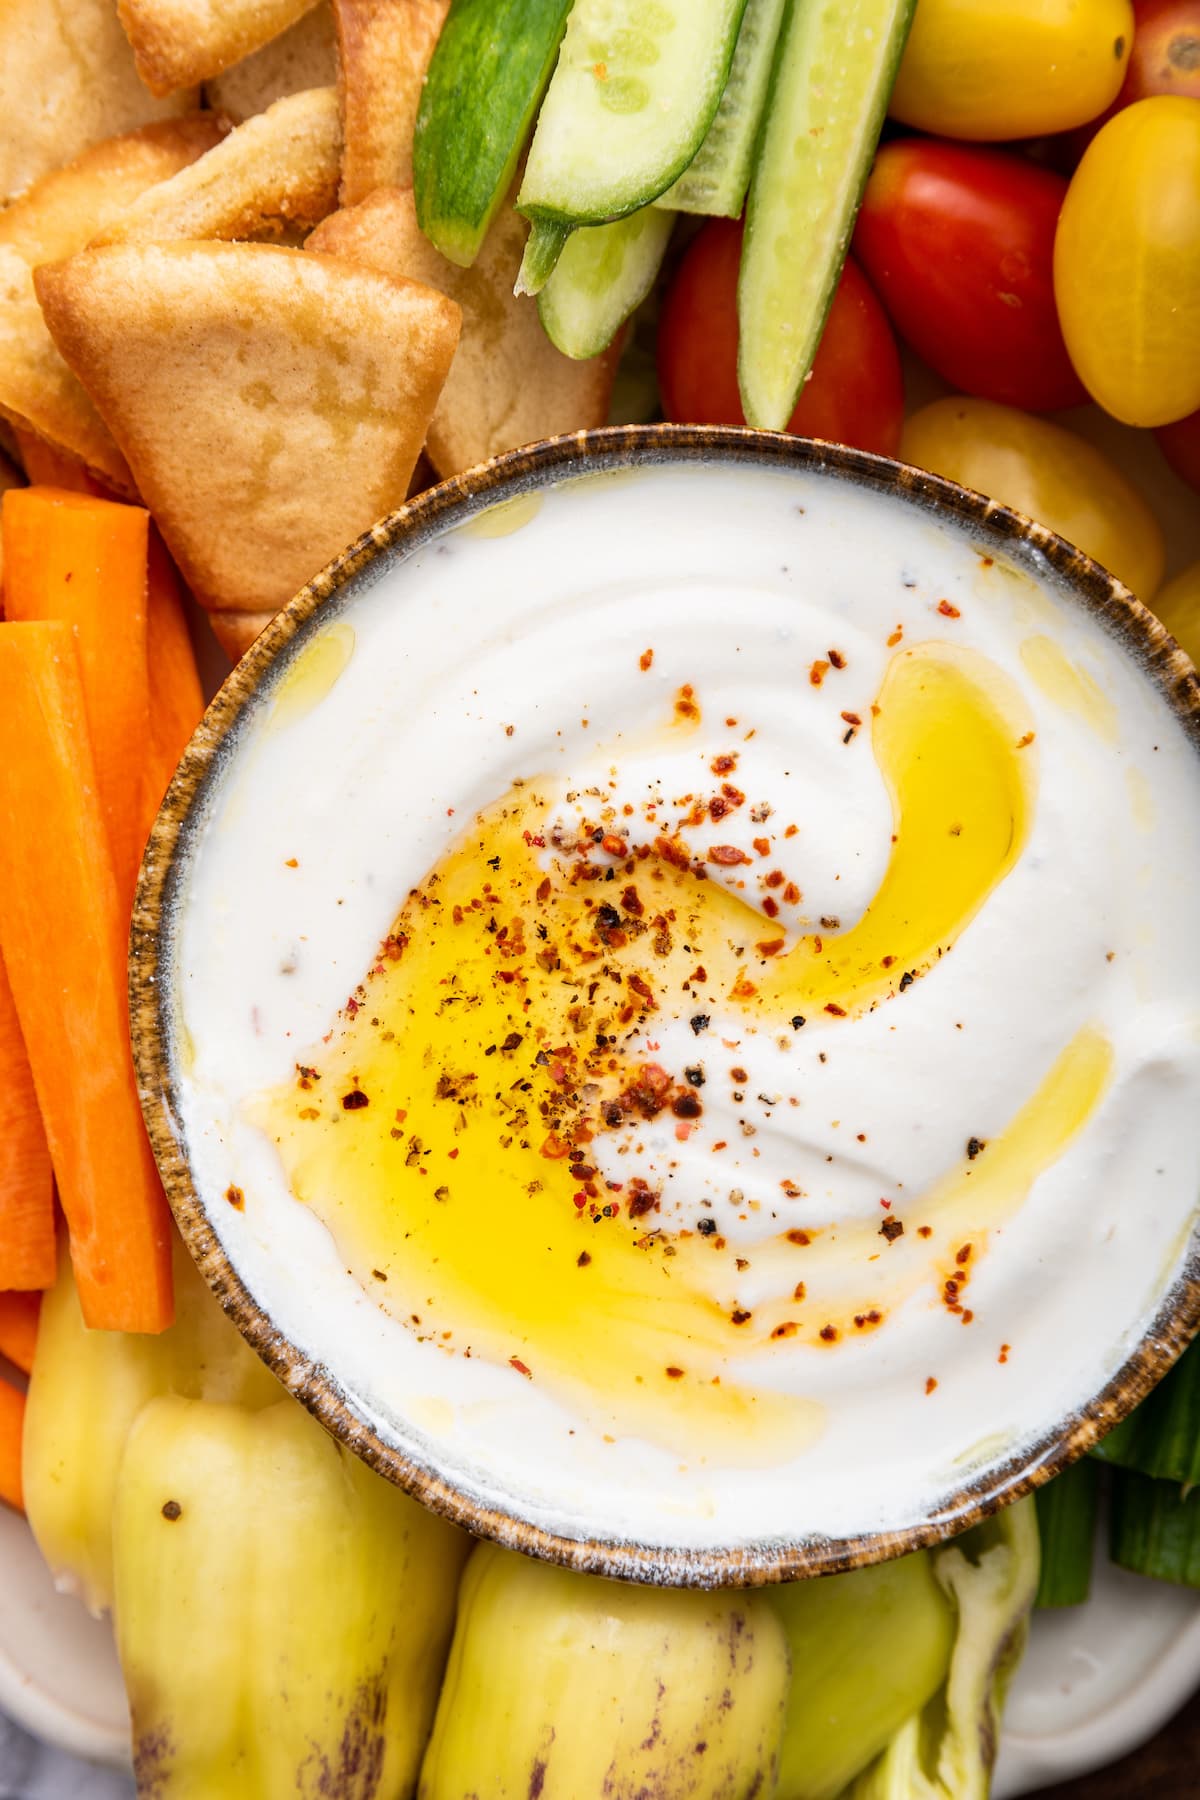 Whipped cottage cheese in a small dipping bowl topped with olive oil and crushed red pepper. Around the bowl are tomatoes, cucumbers, carrots, peppers, and pita chips.